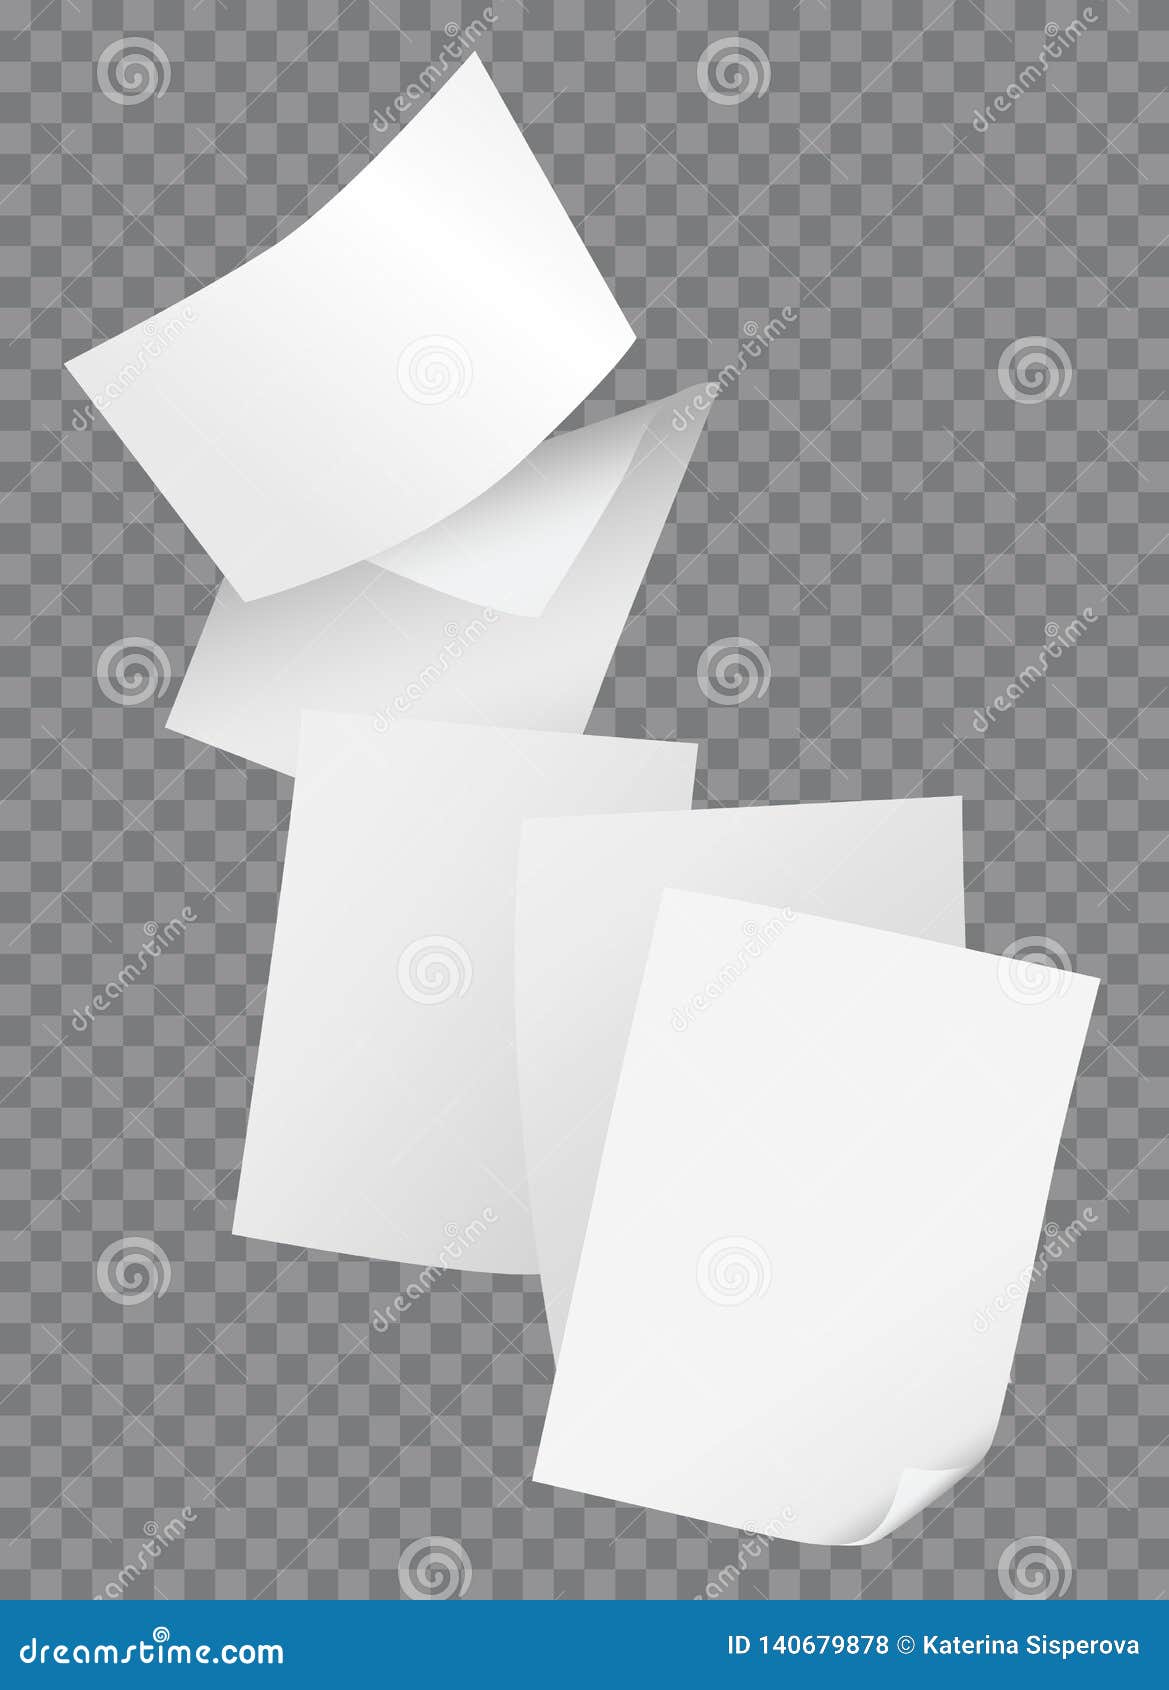 flying blank papers  on transparent background  